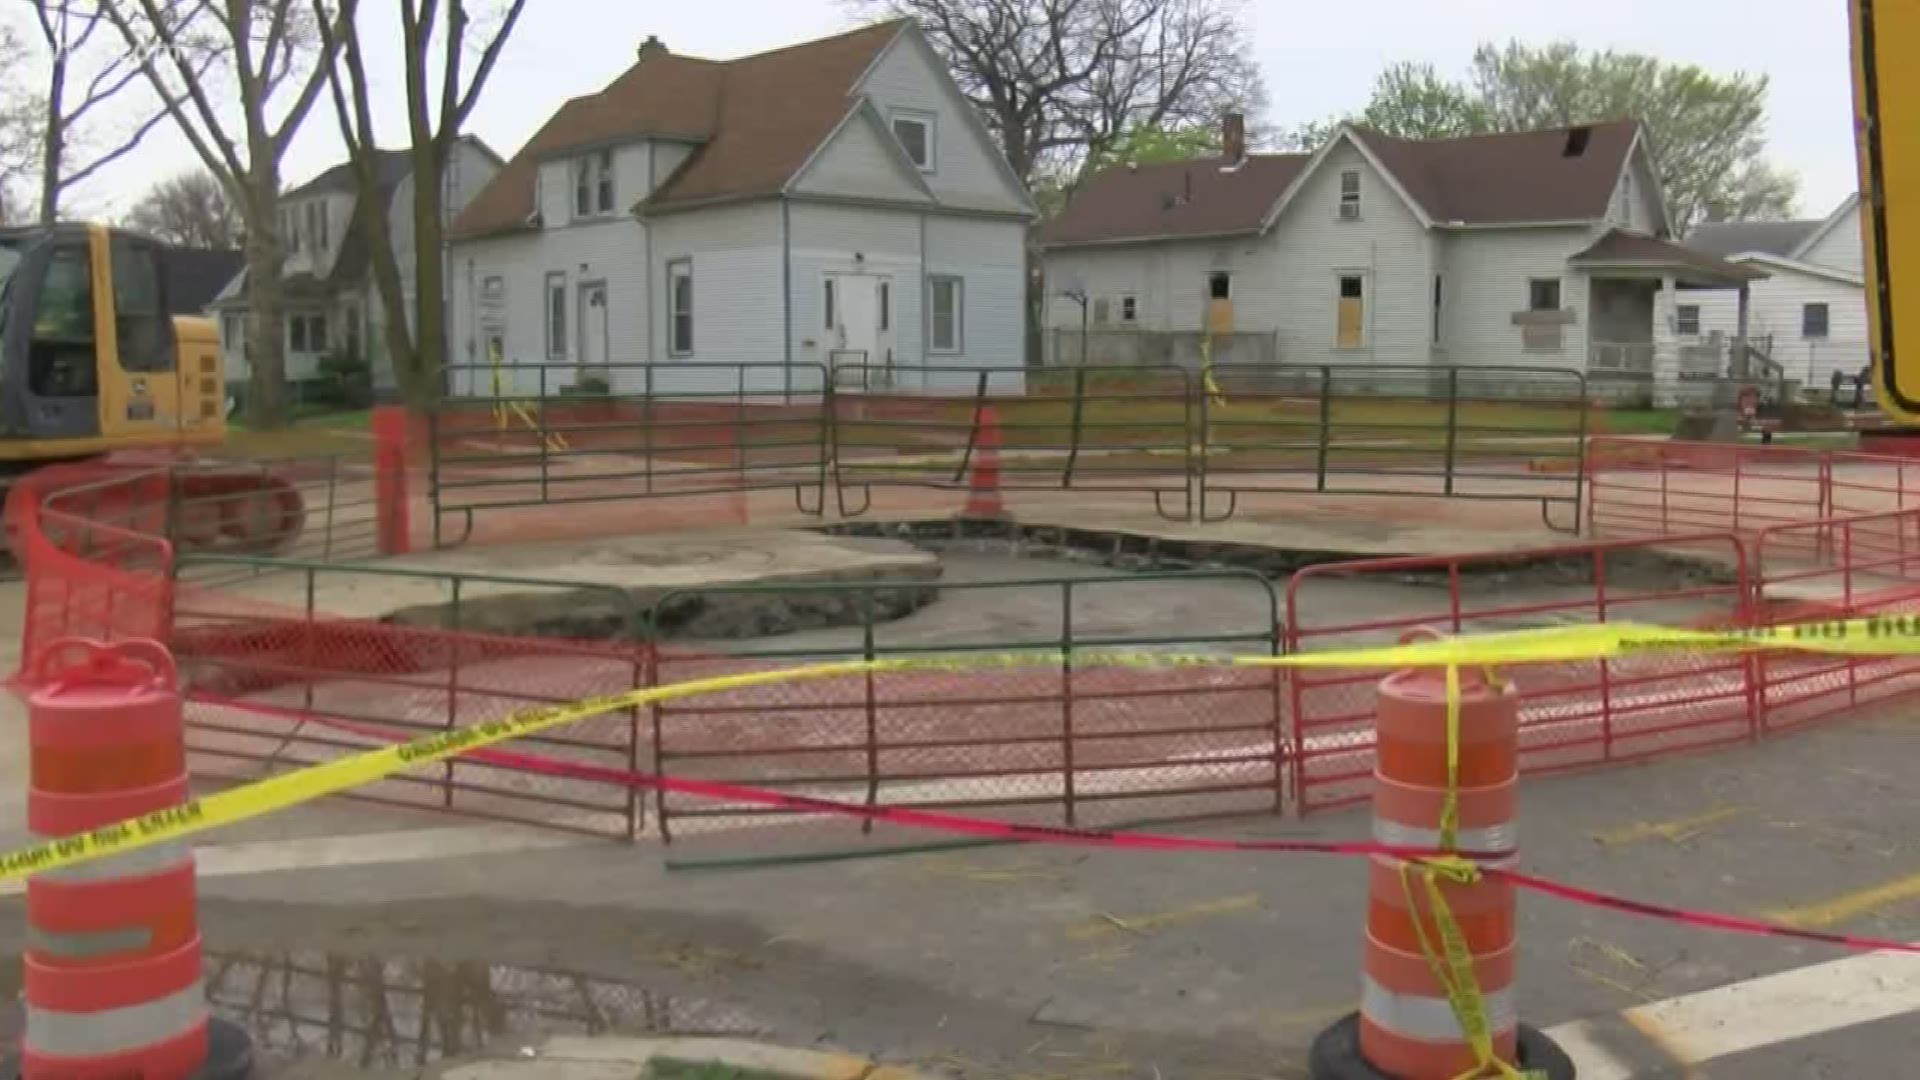 The City has confirmed another sinkhole at Sylvania and Bennett.